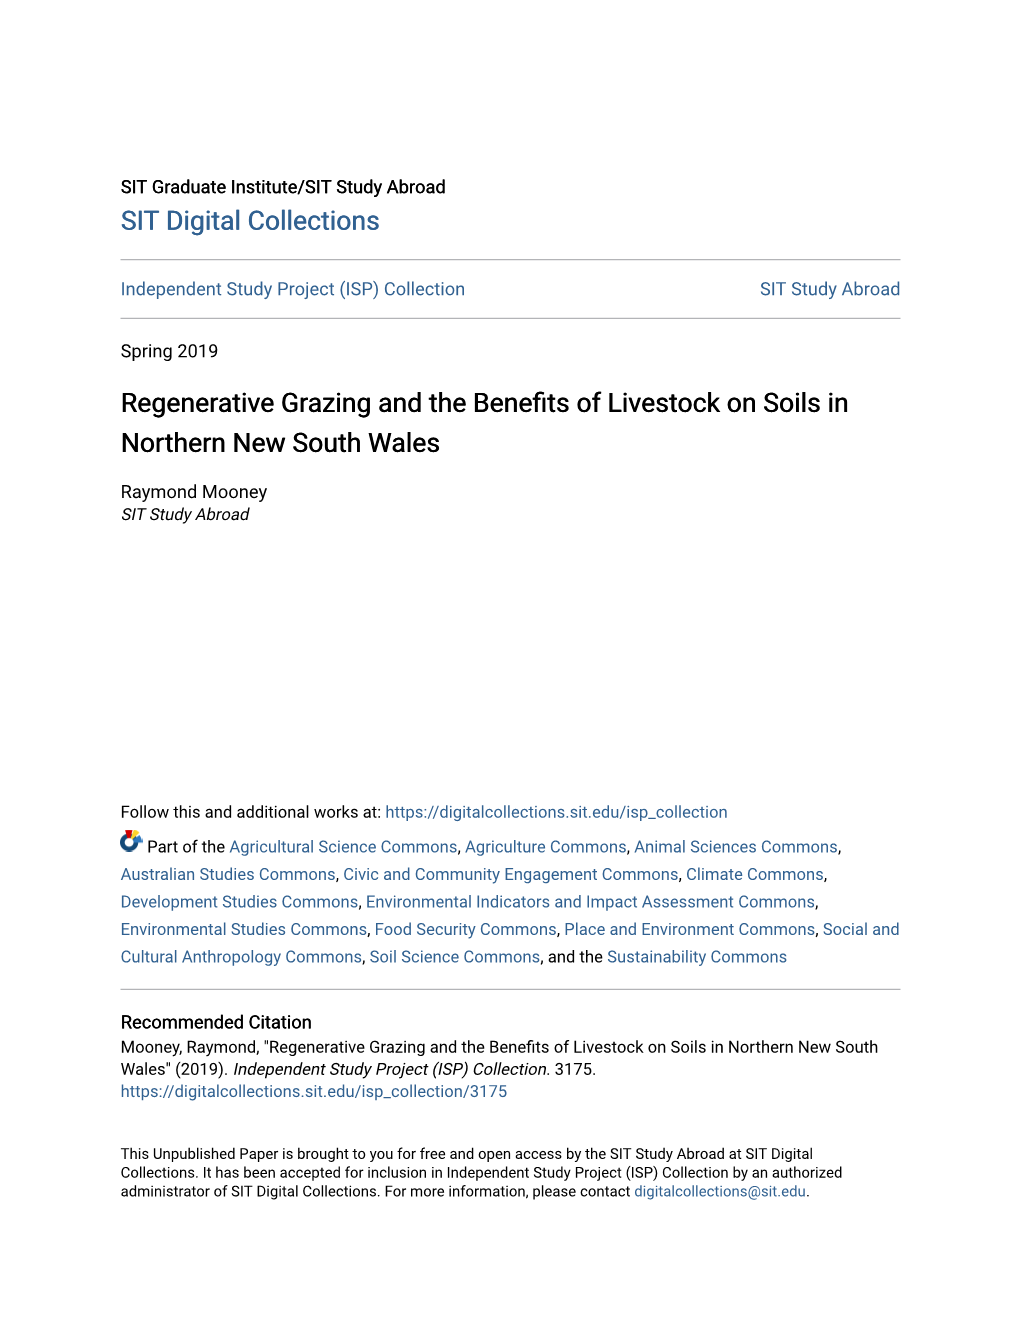 Regenerative Grazing and the Benefits of Livestock on Soils in Northern New South Wales